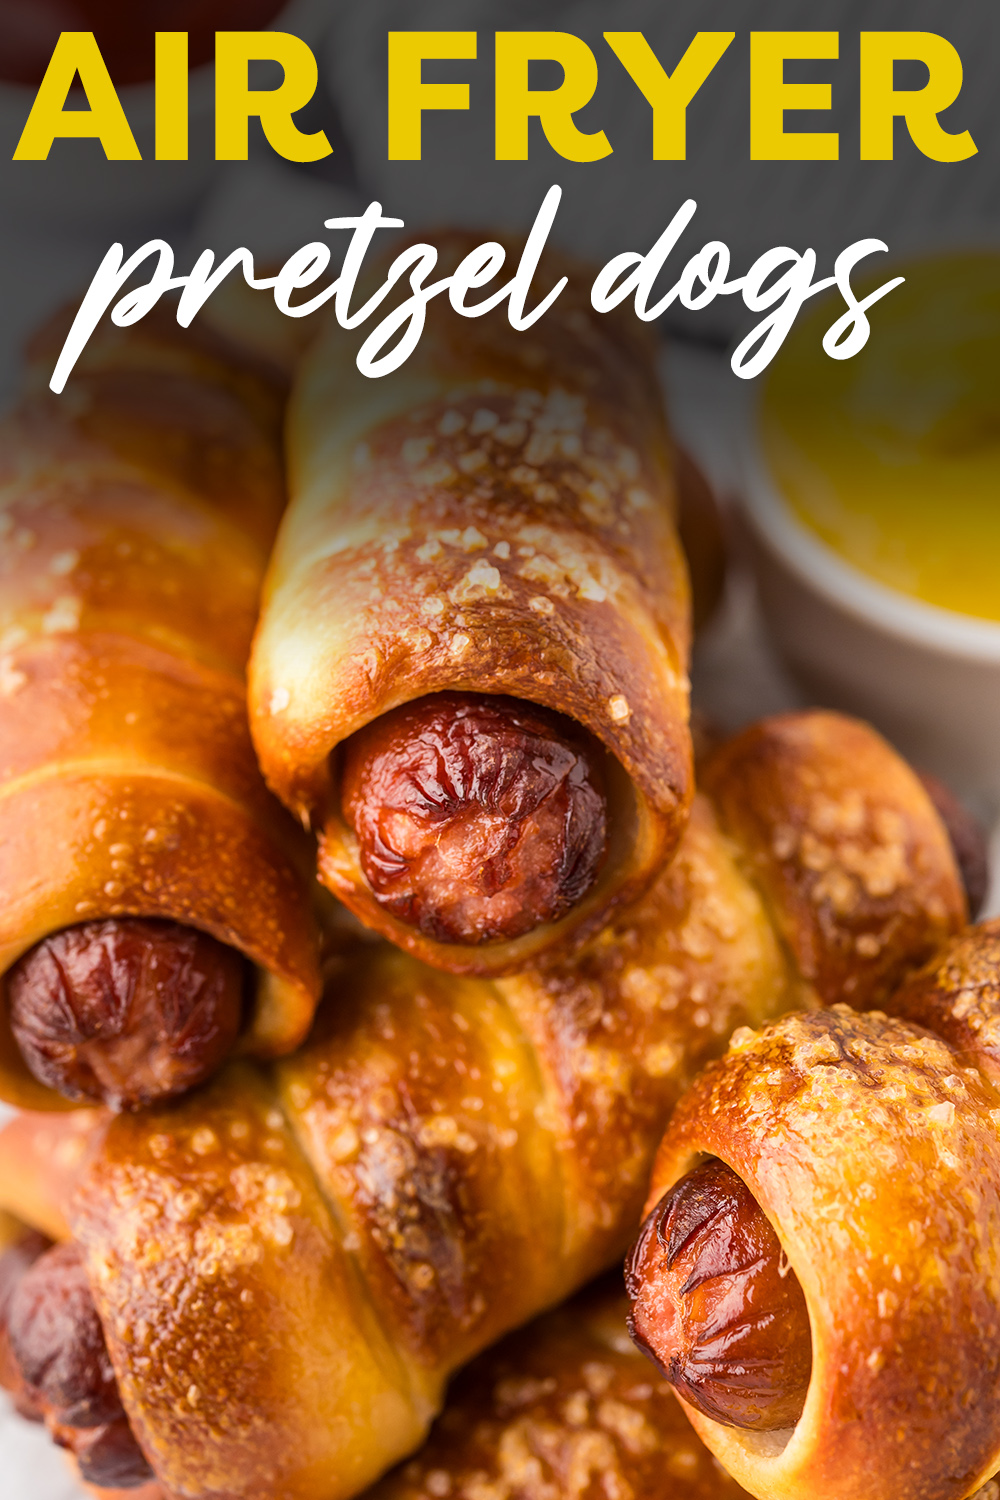 We used our air fryer to get the perfect pretzel dog!  The fluffy, crips pretzel hugs the hot dog while the air fryer cooks them all.  AMAZING!